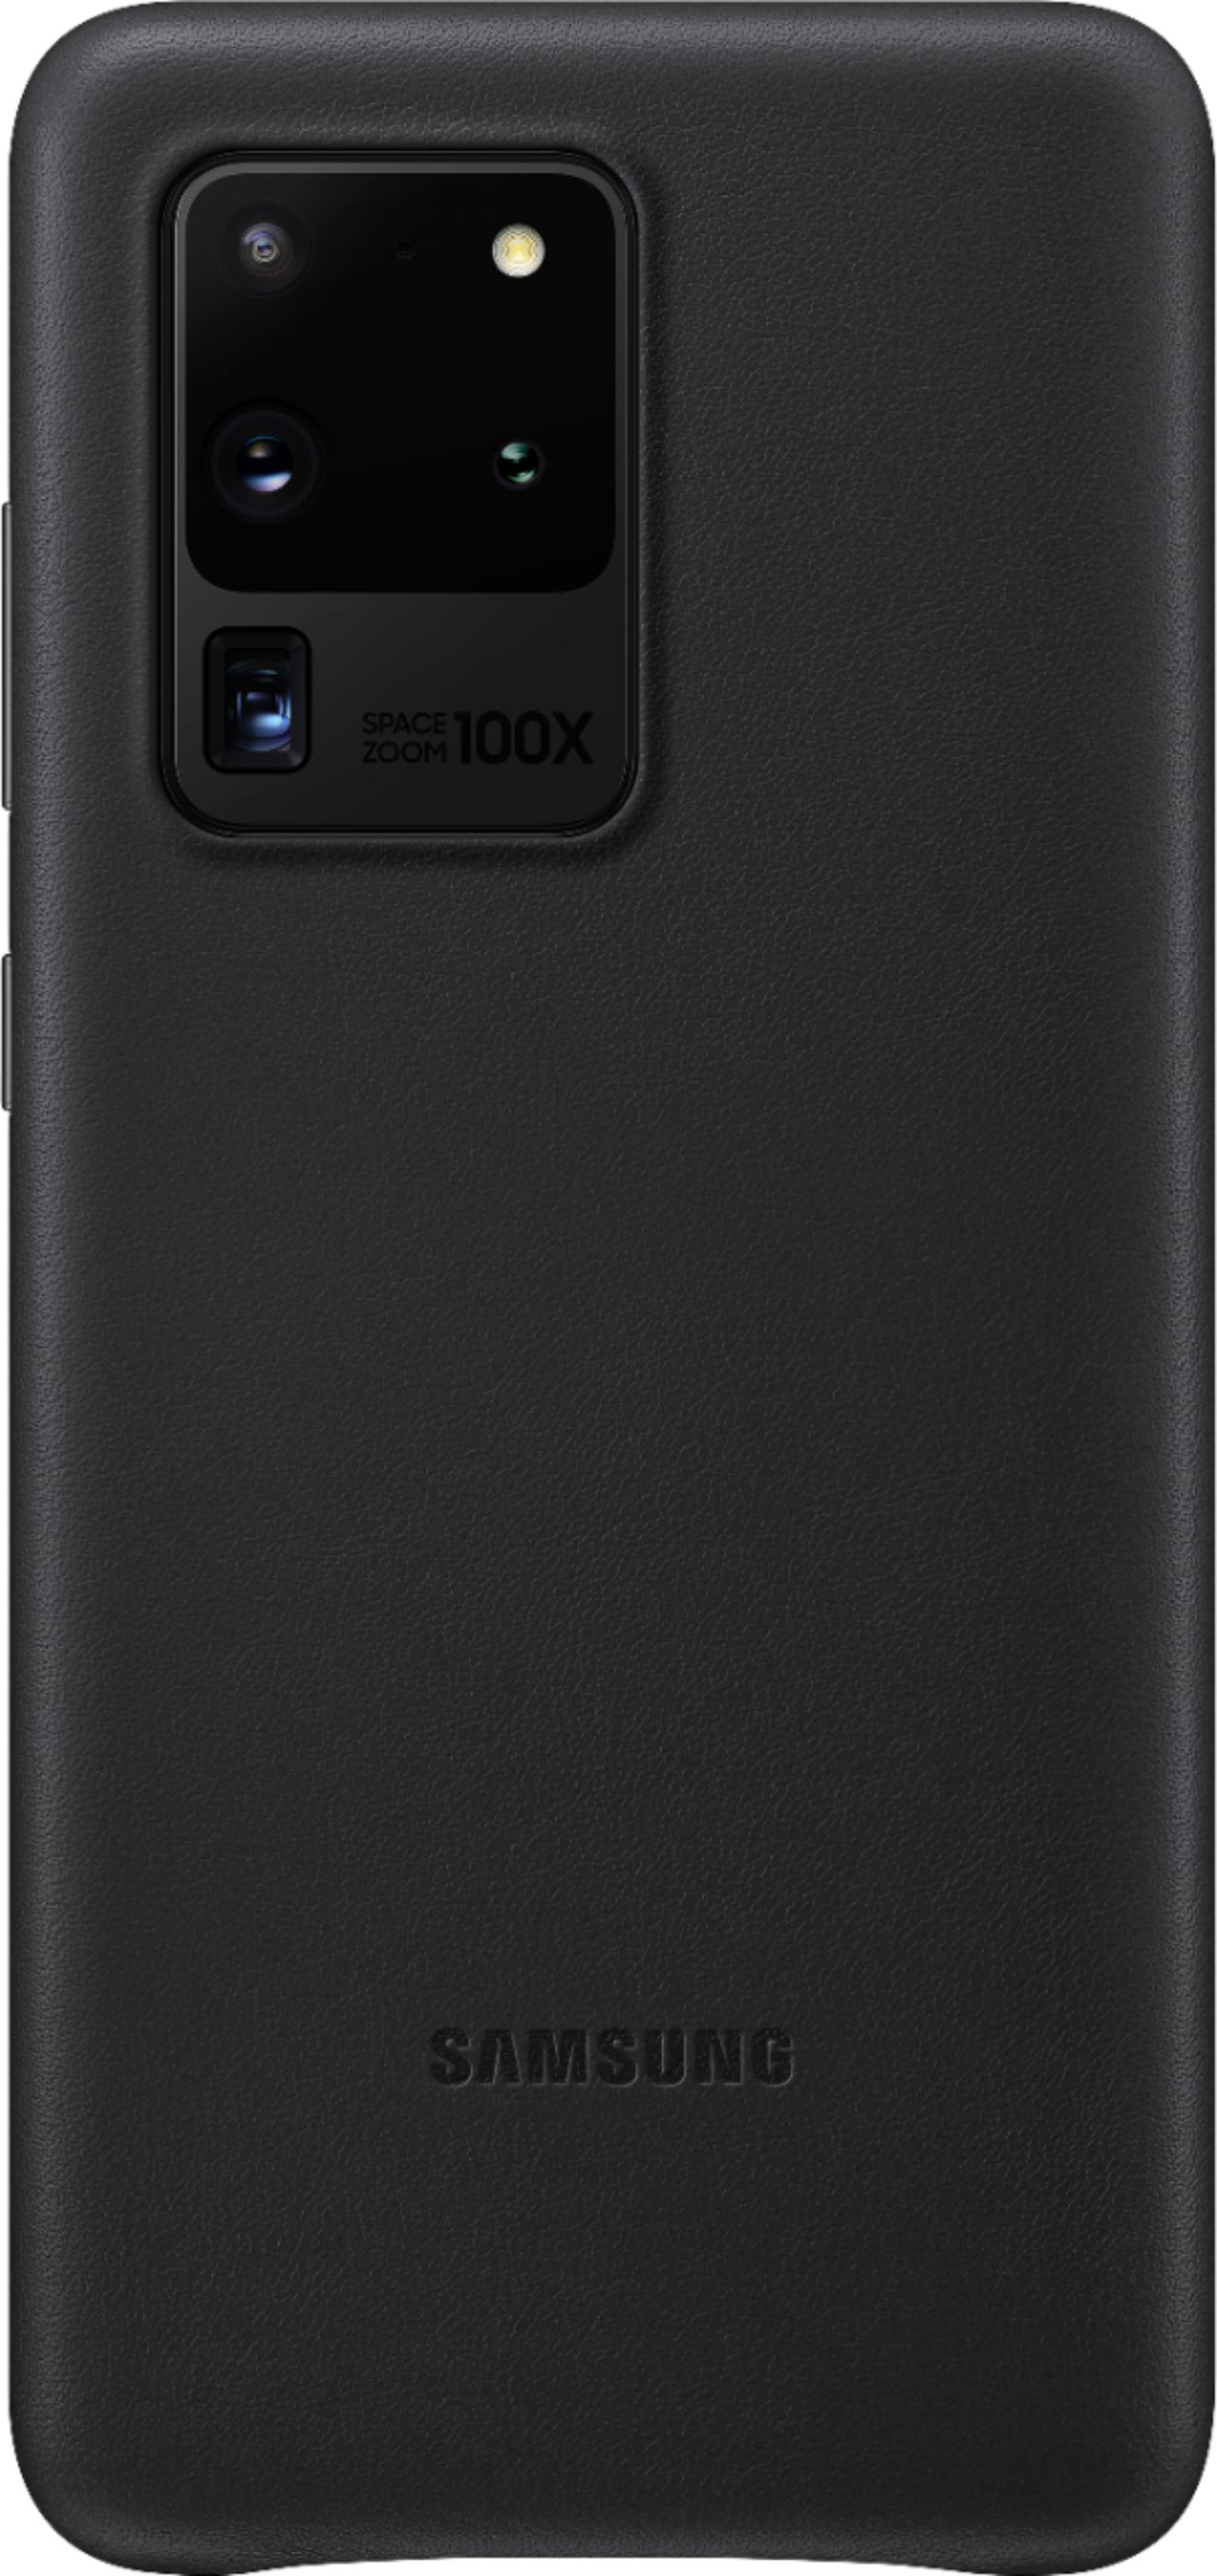 Leather Back Cover Case For Samsung Galaxy S20 Ultra 5g Black Ef